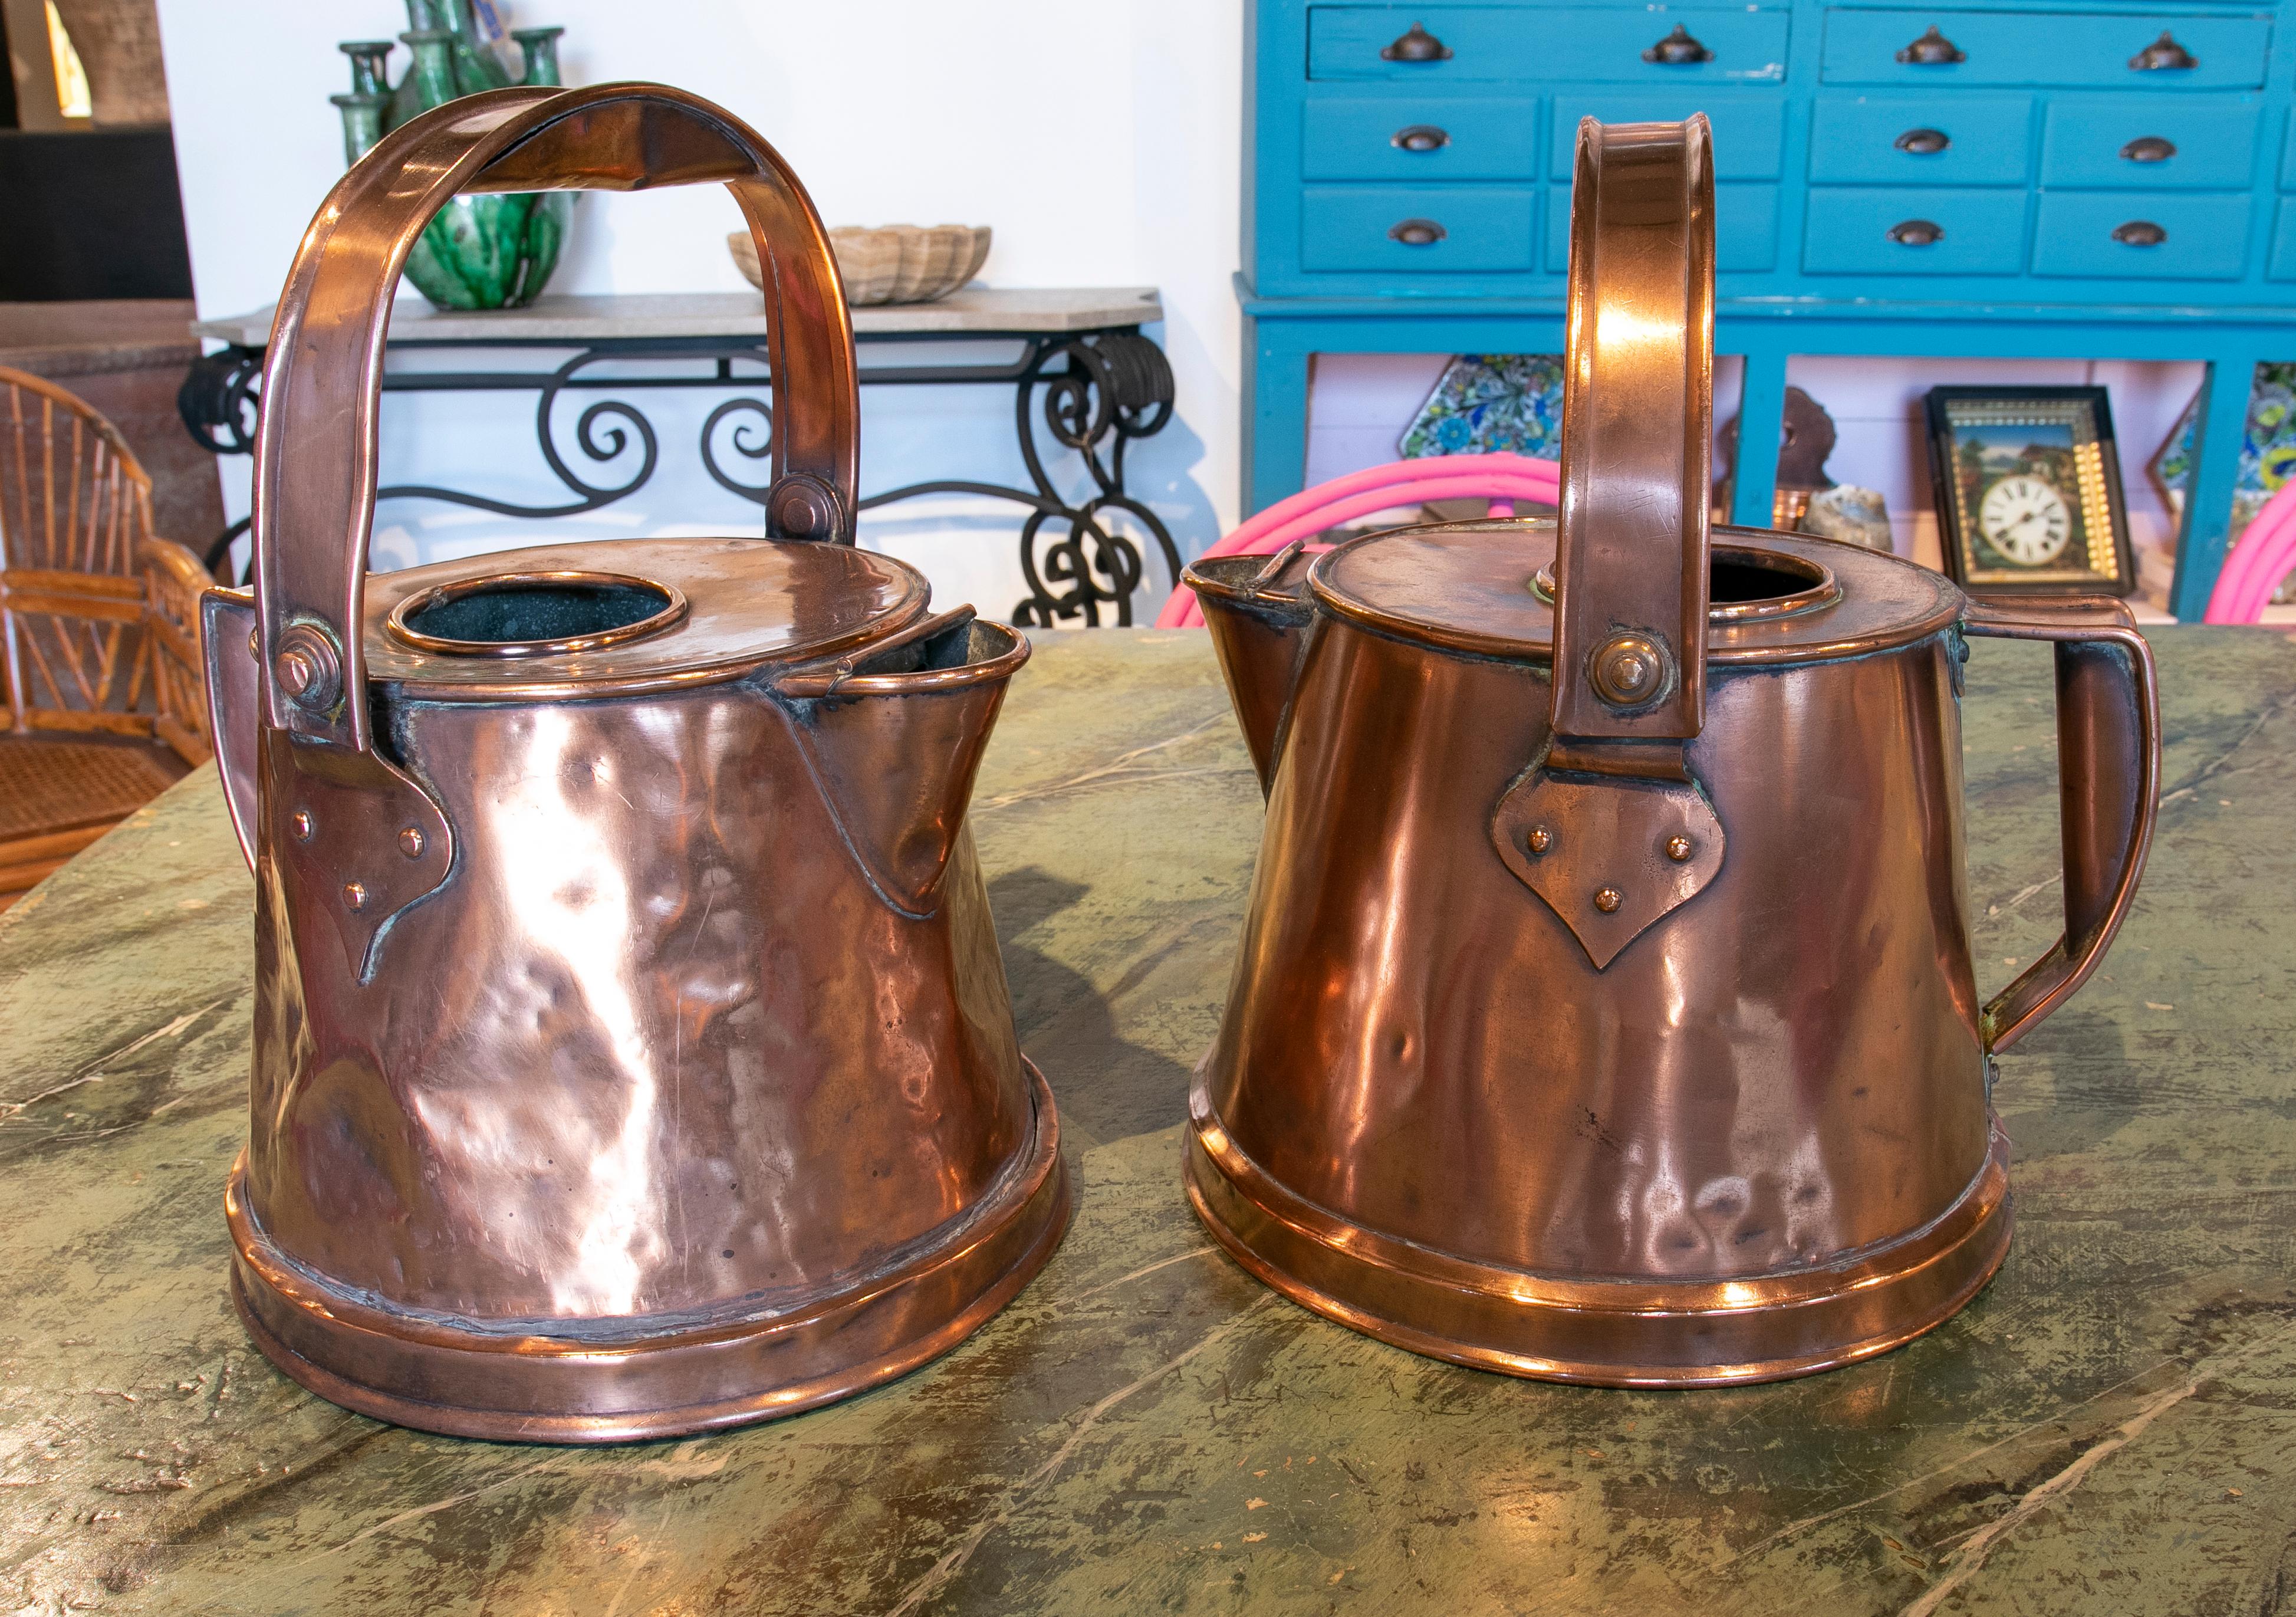 Pair of copper milk jars from the XIX century with a handle at the top.